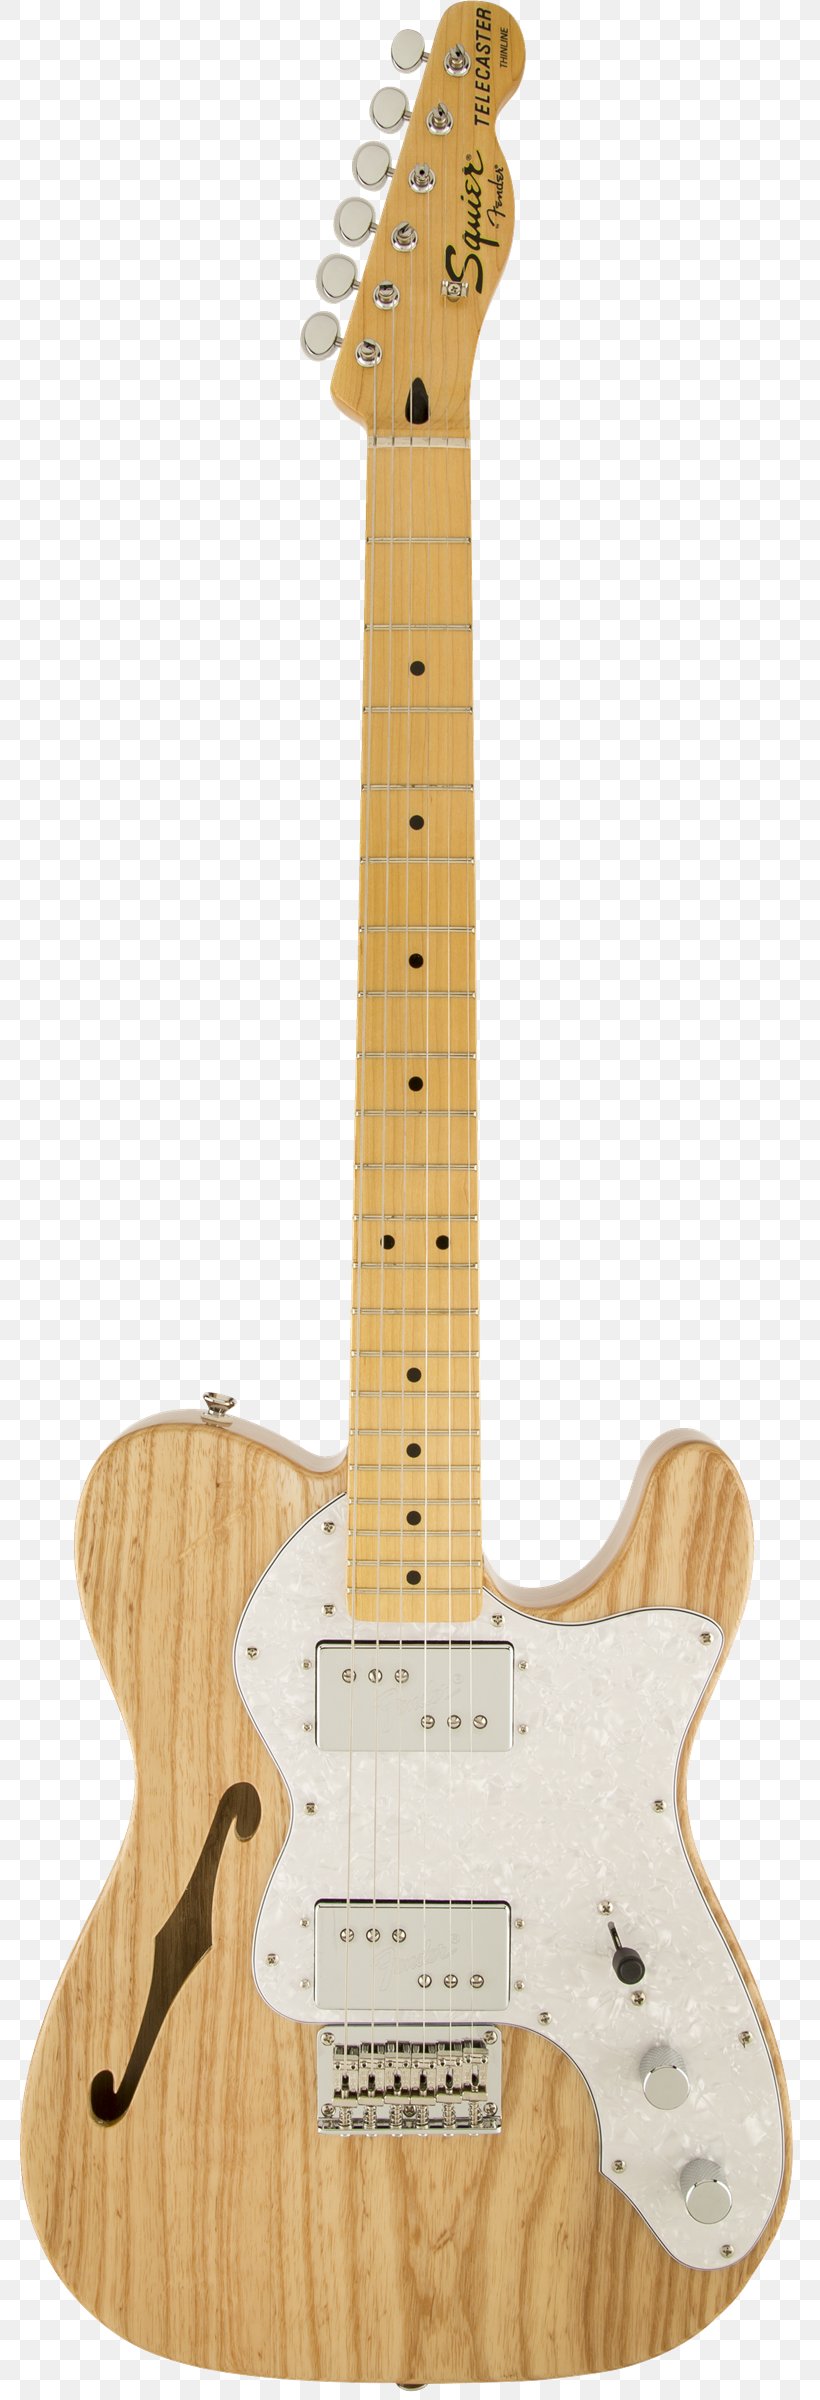 Fender Telecaster Thinline Fender Stratocaster Squier Musical Instruments, PNG, 782x2400px, Fender Telecaster Thinline, Acoustic Electric Guitar, Bass Guitar, Electric Guitar, Electronic Musical Instrument Download Free